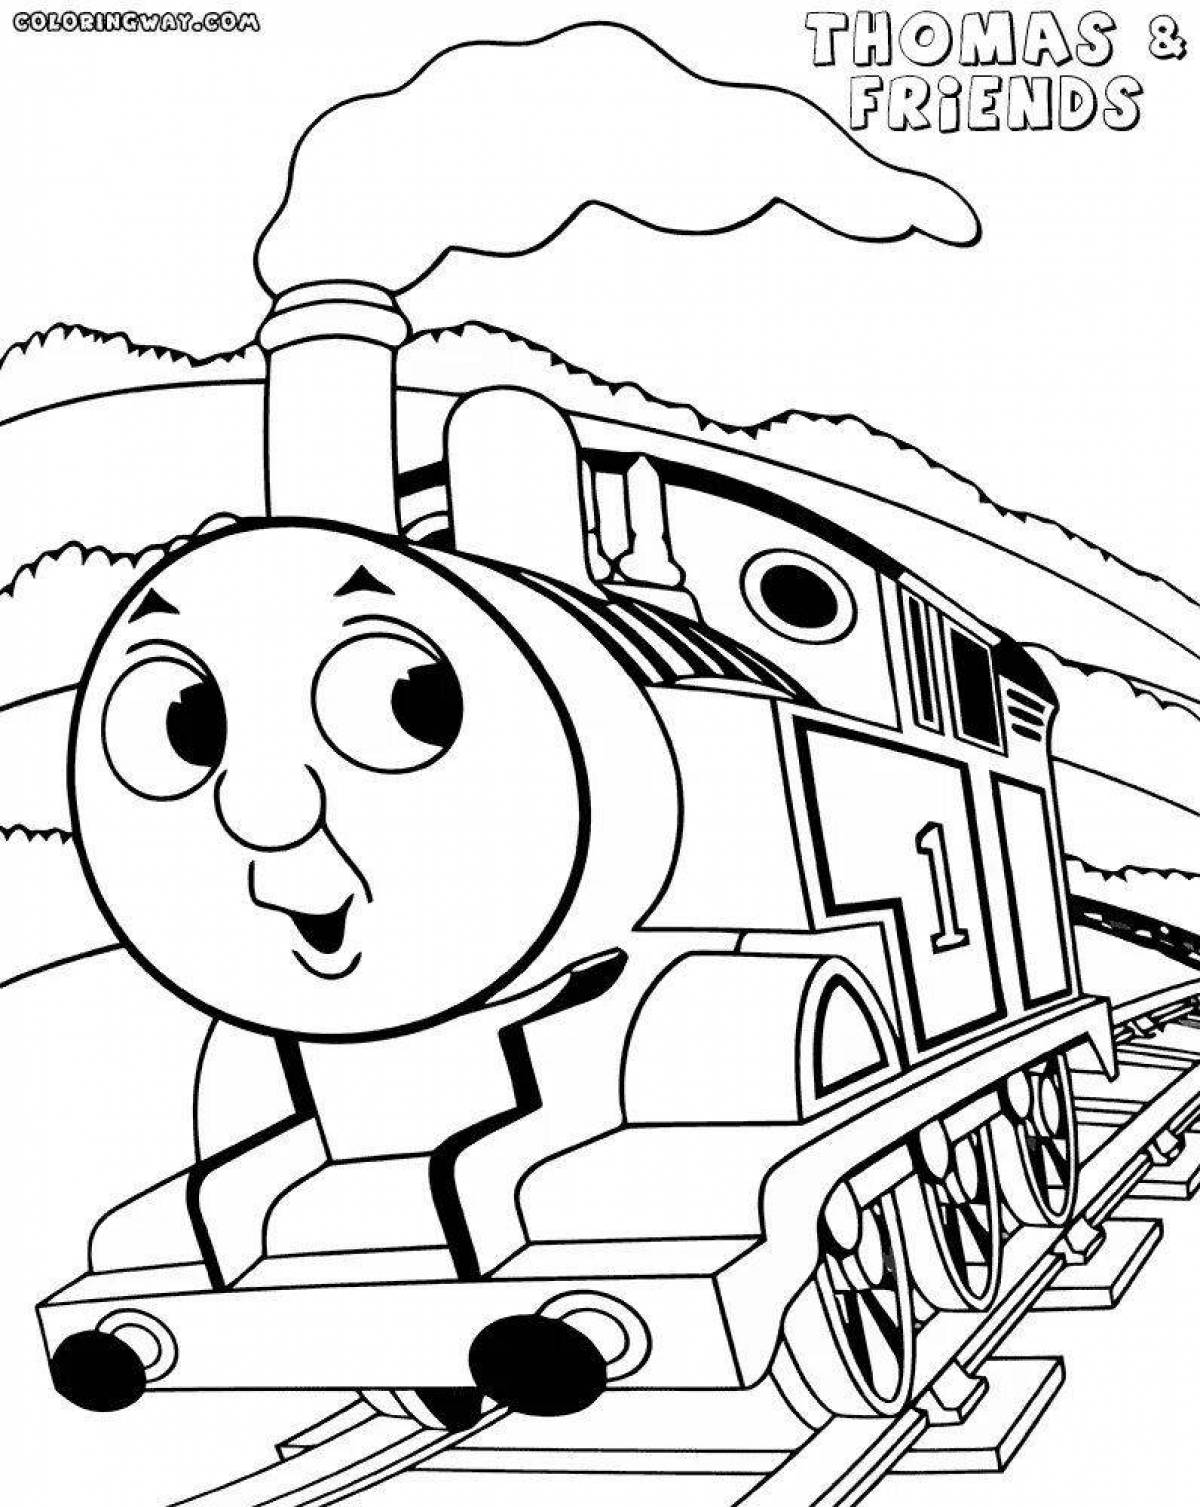 Color sparkling thomas the tank engine coloring book